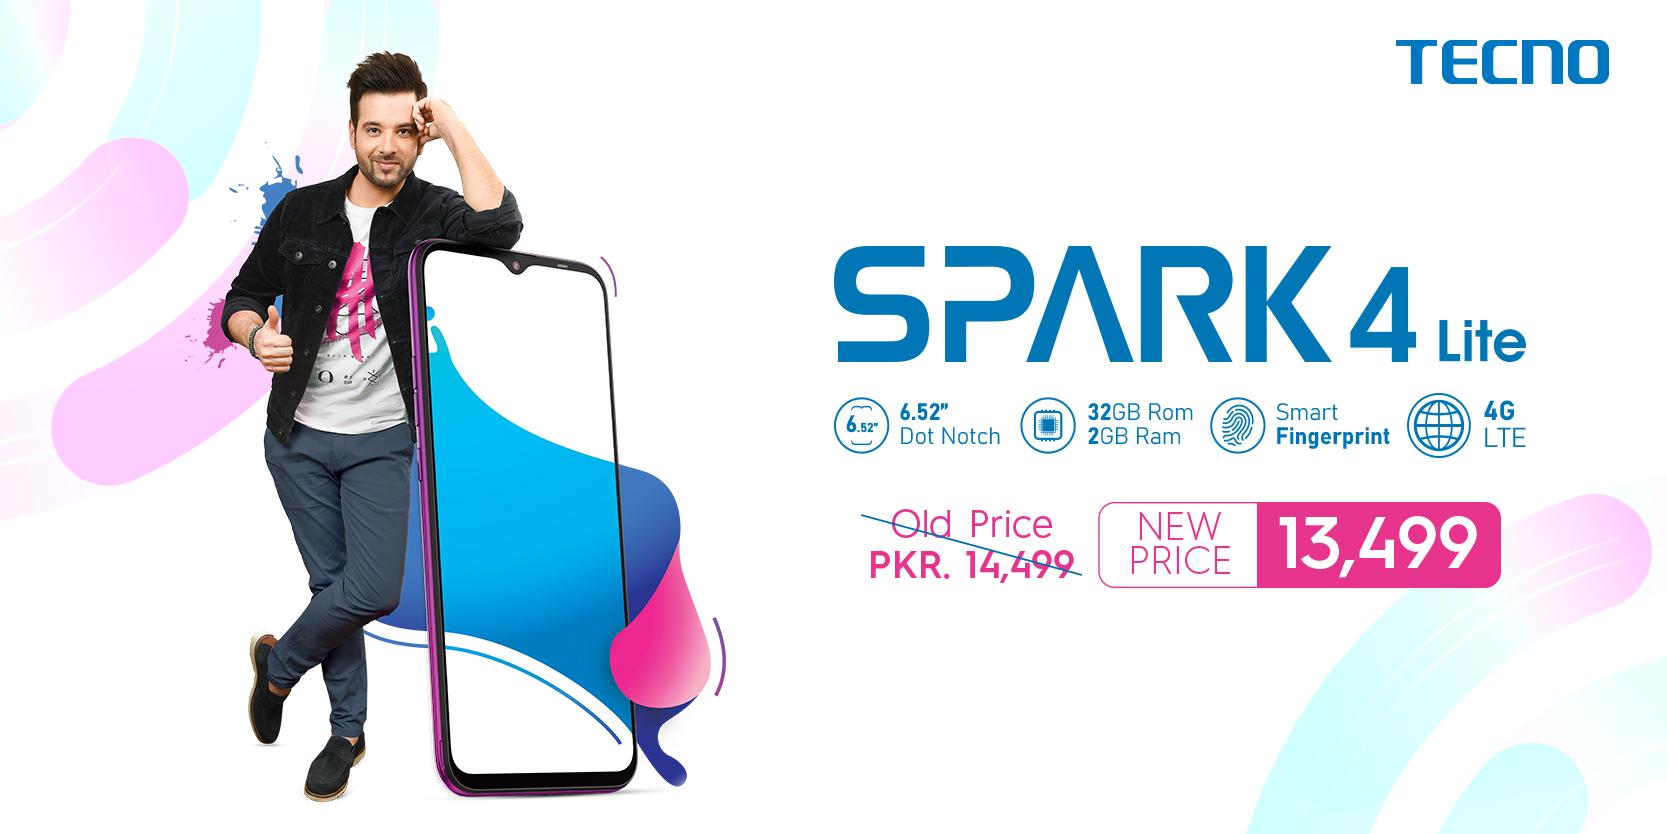 TECNO Spark 4, a popular smartphone now at an amazing discounted price